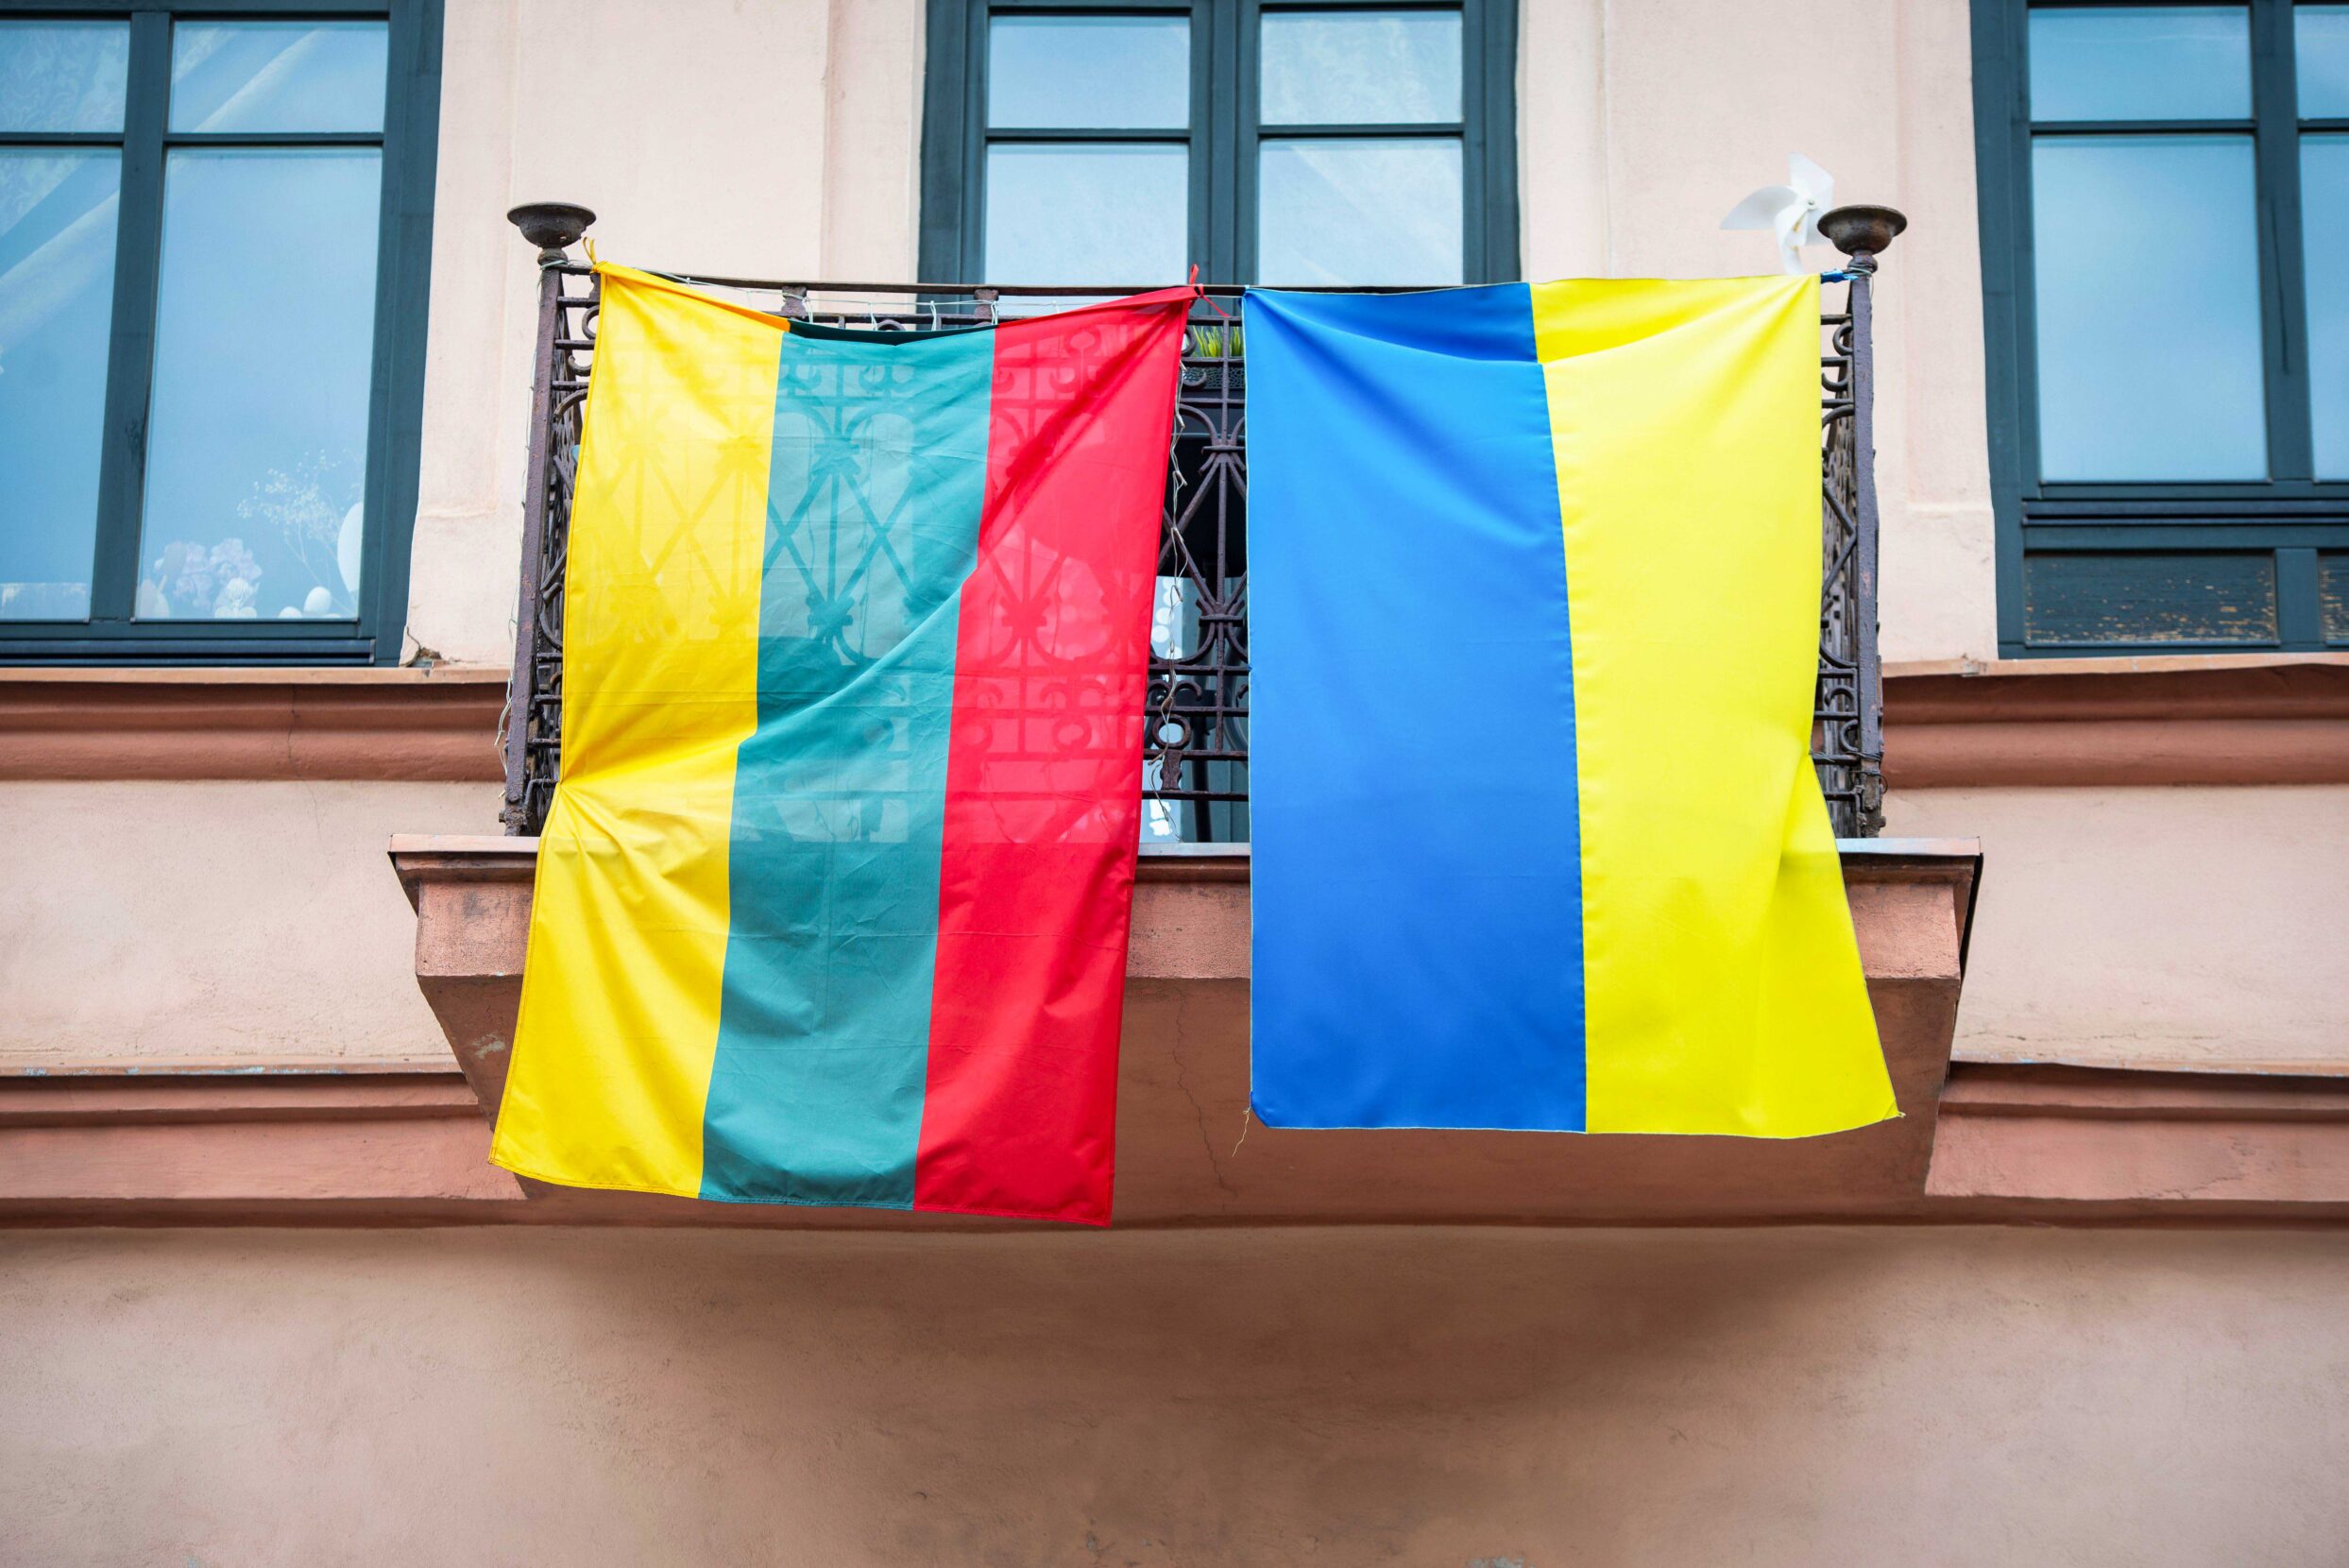 Flags of Ukraine (blue and yellow) and Lithuania (yellow, green, red) on a balcony in a street in Vilnius, Lithuania